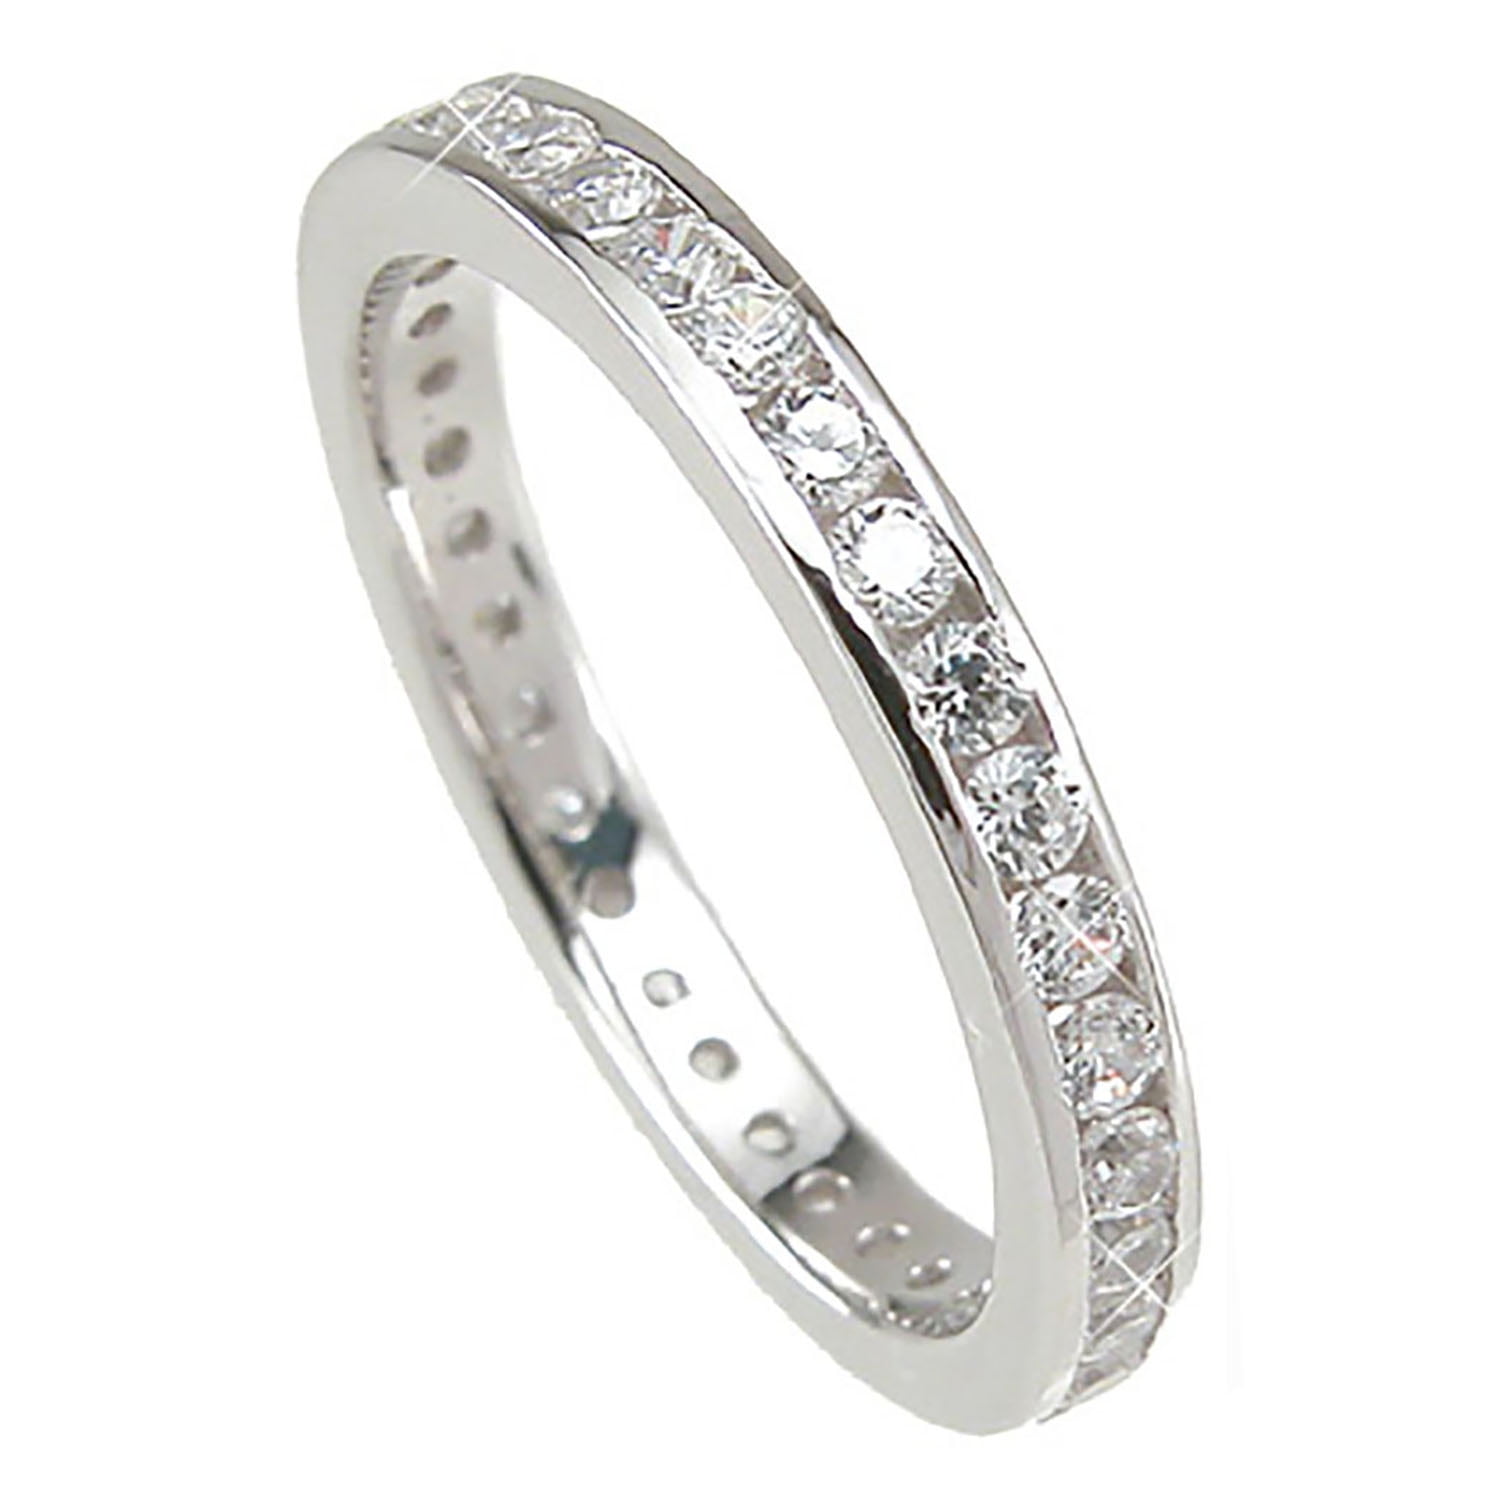 Sterling Silver Round CZ Channel Set Half Eternity Ring Band Anniversary Ring 4MM Size 3 to 12 